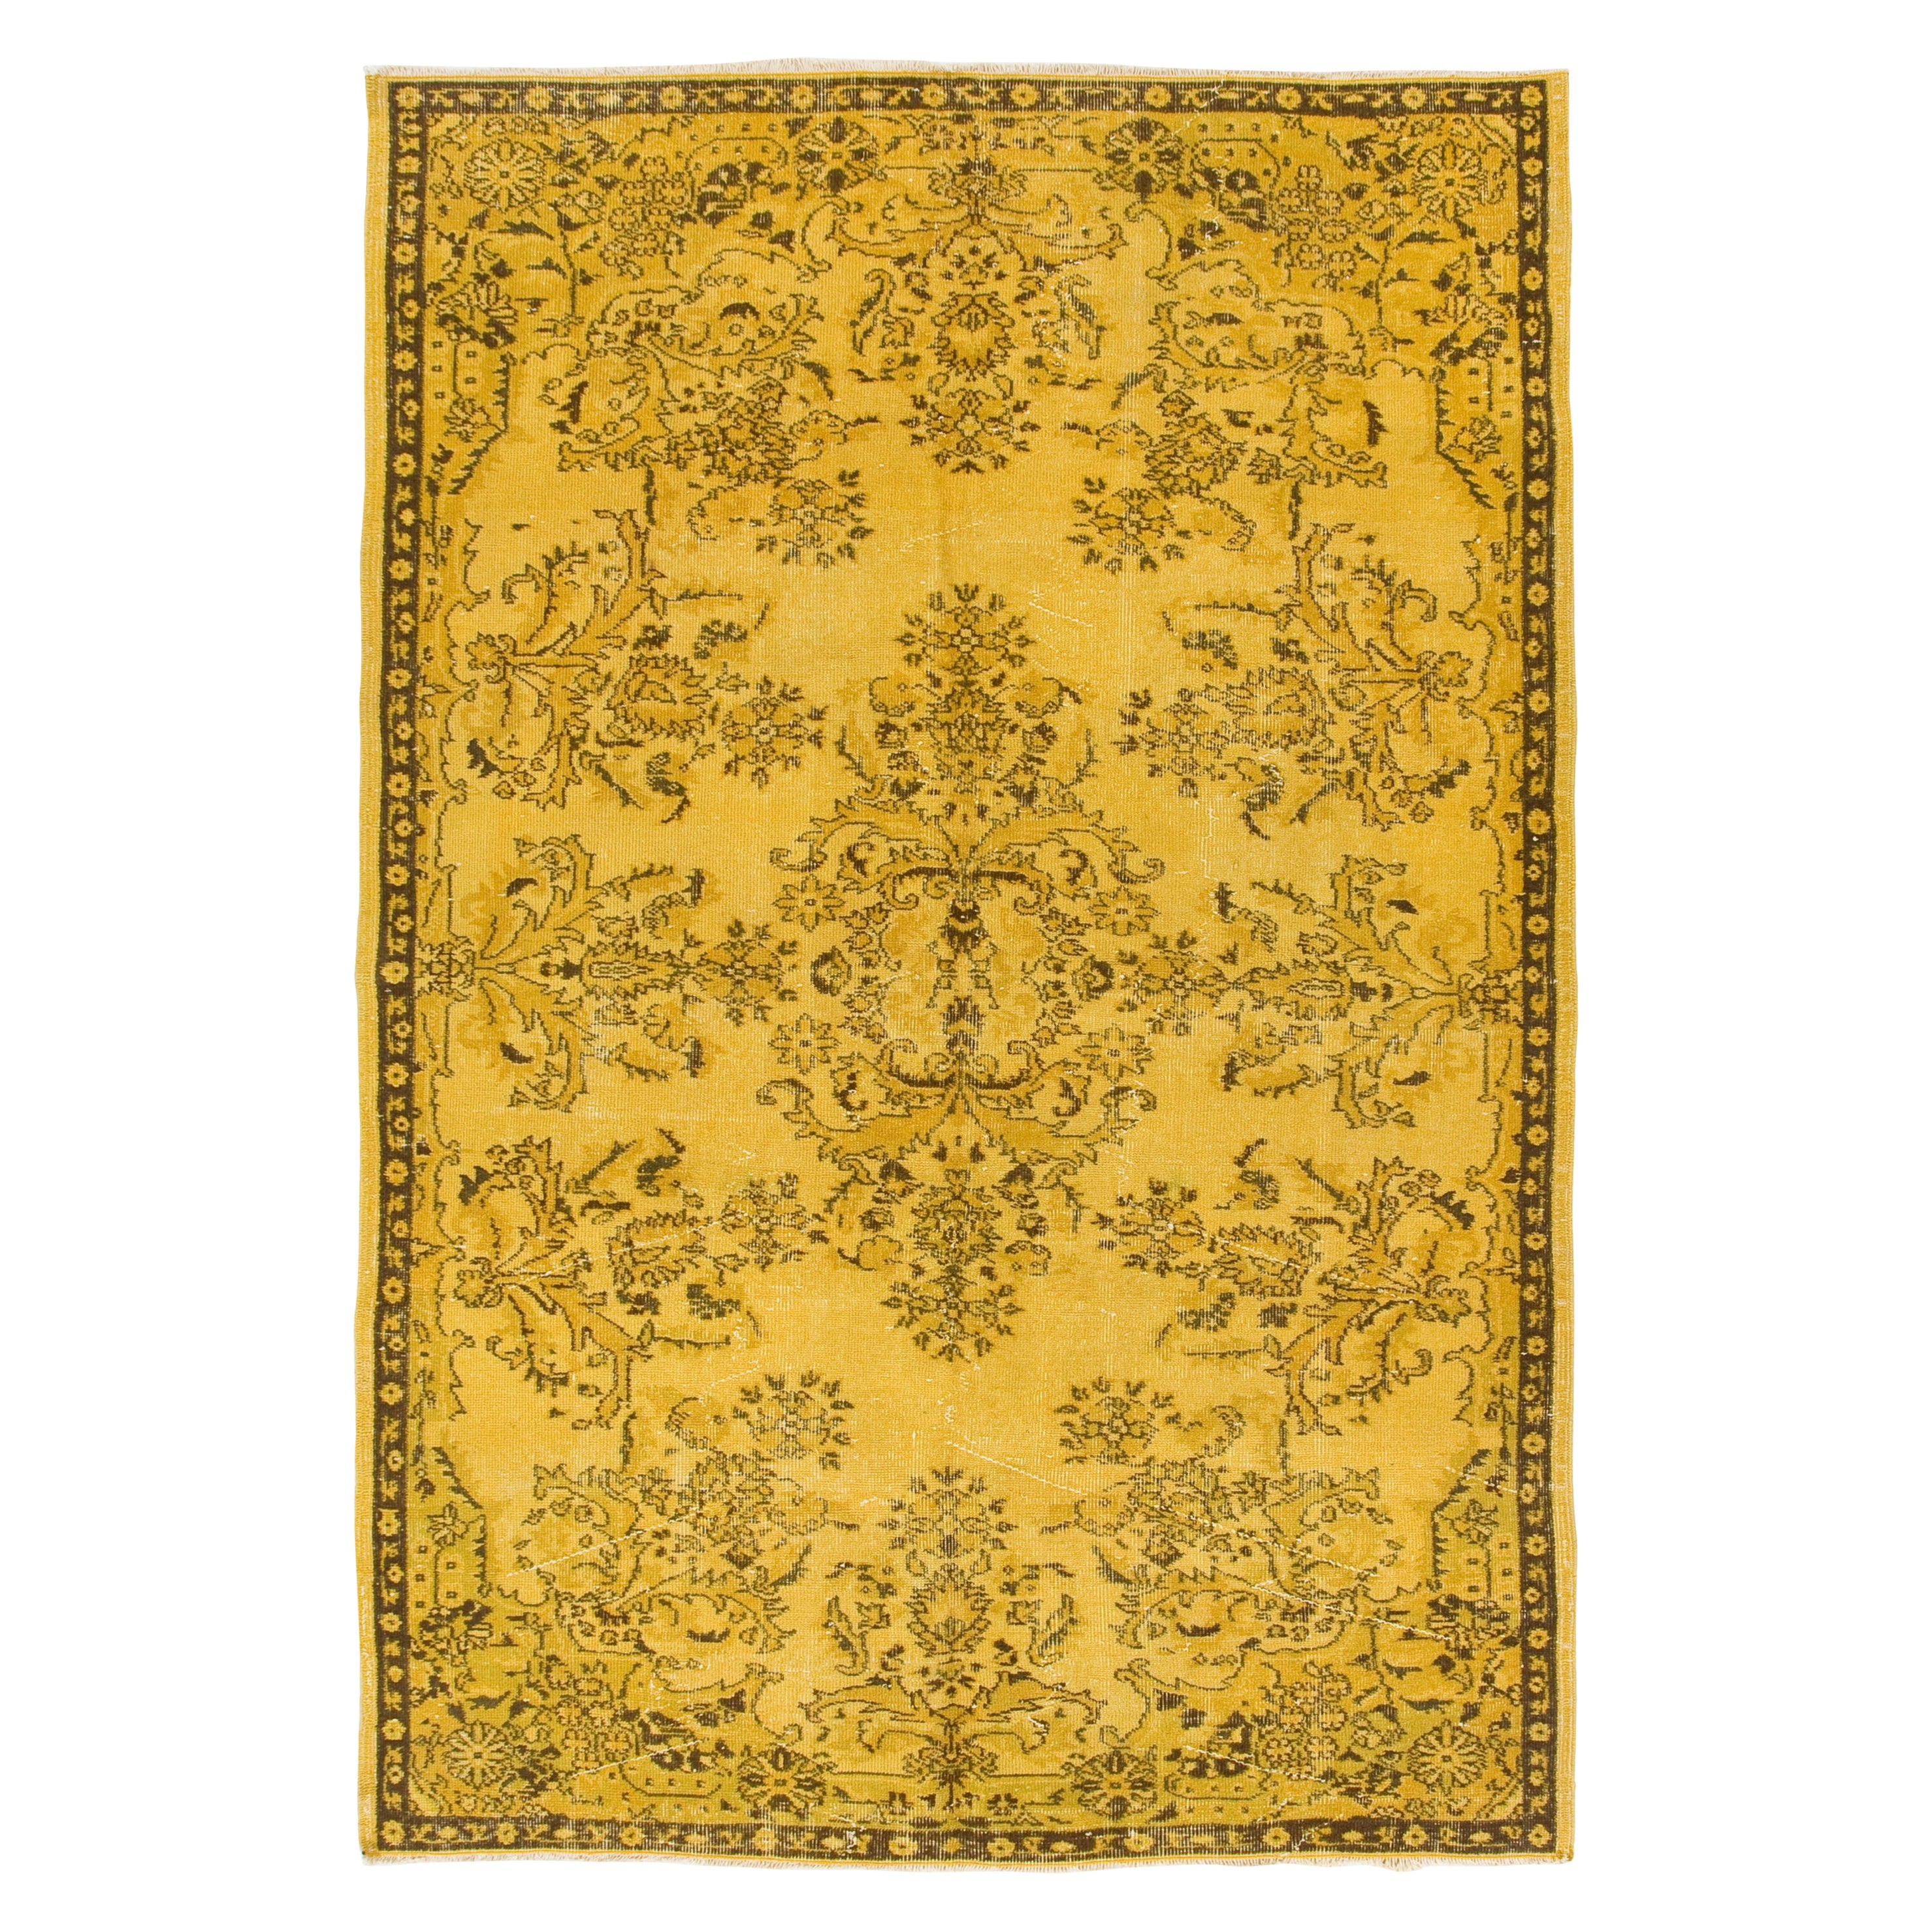 6x8.7 Ft Vintage Handmade Anatolian Rug in Yellow. Floral Garden Design Carpet For Sale